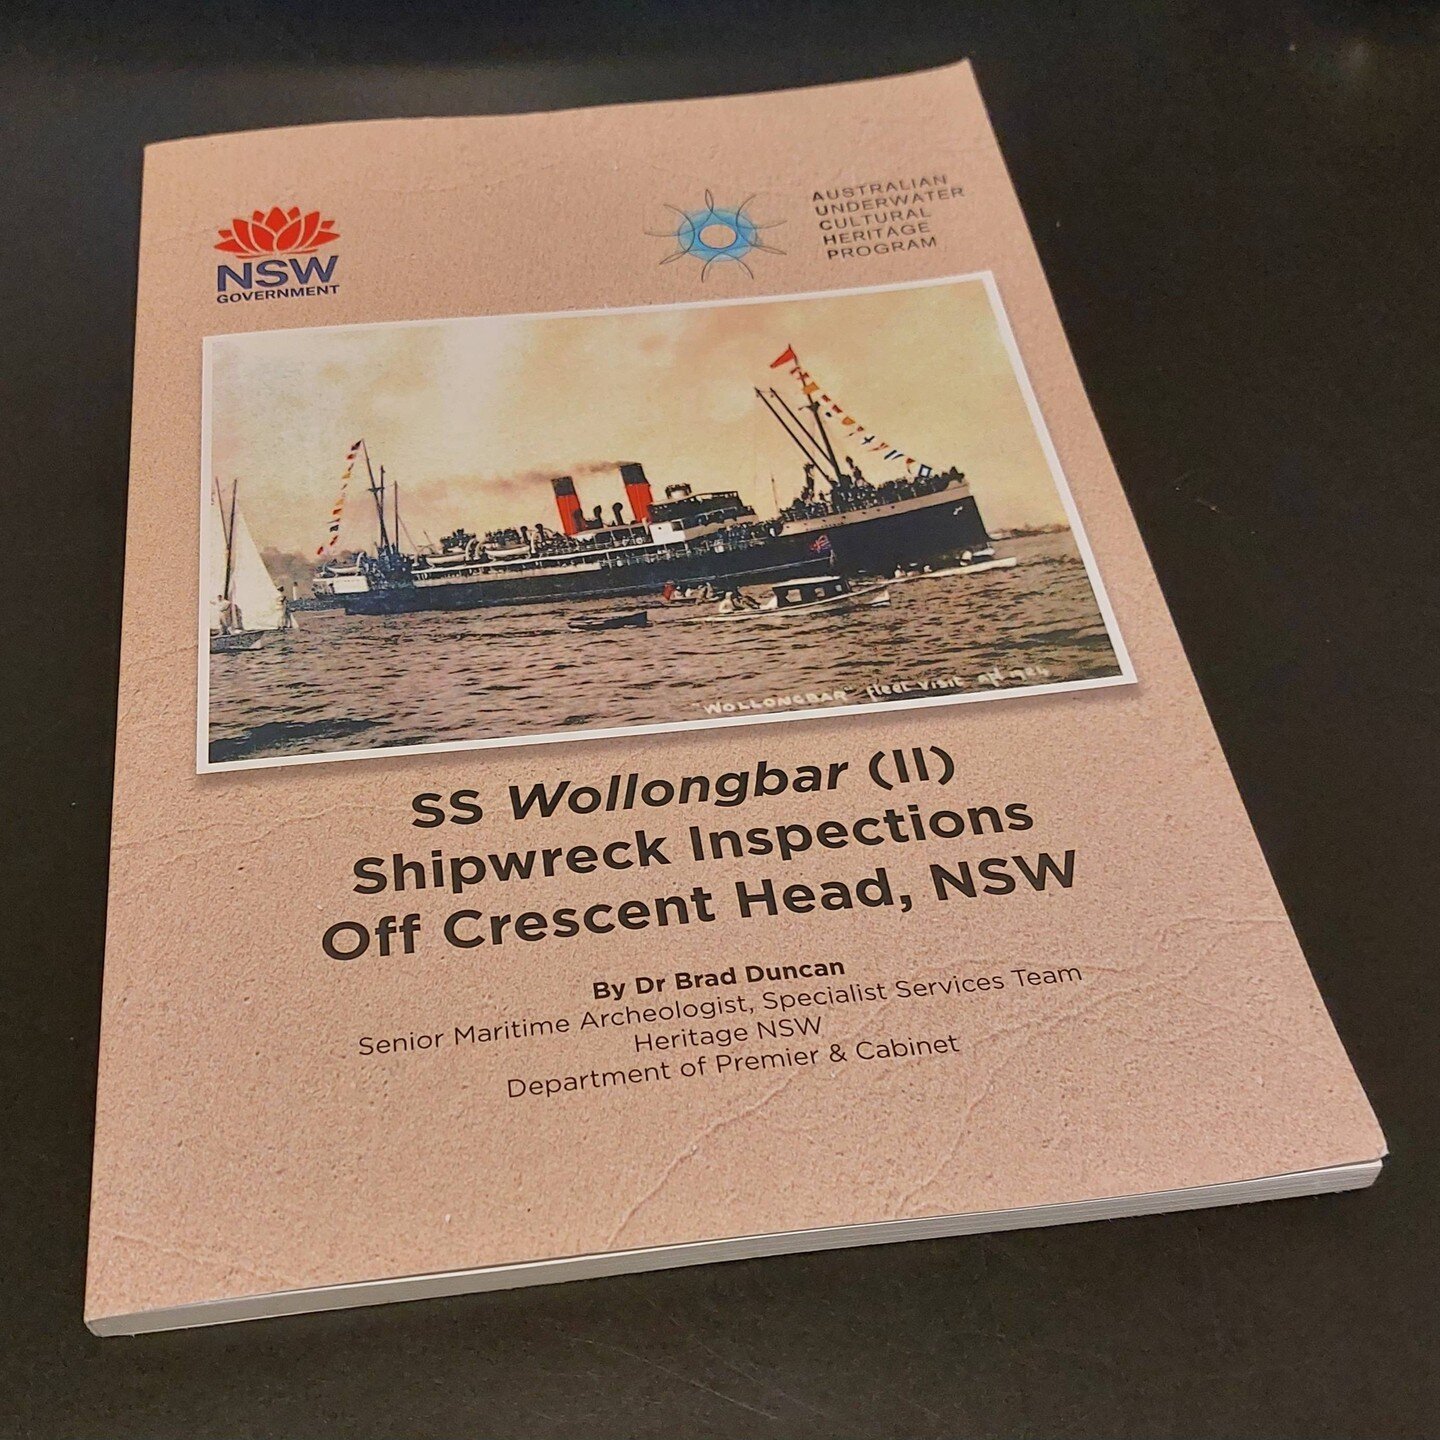 Congratulations to Dr Brad Duncan and the Specialist Services Team at Heritage NSW for their successful investigation into the disappearance of the SS Wollongbar (II) which was torpedoed by a Japanese Submarine off the East Coast of Australia in 1943